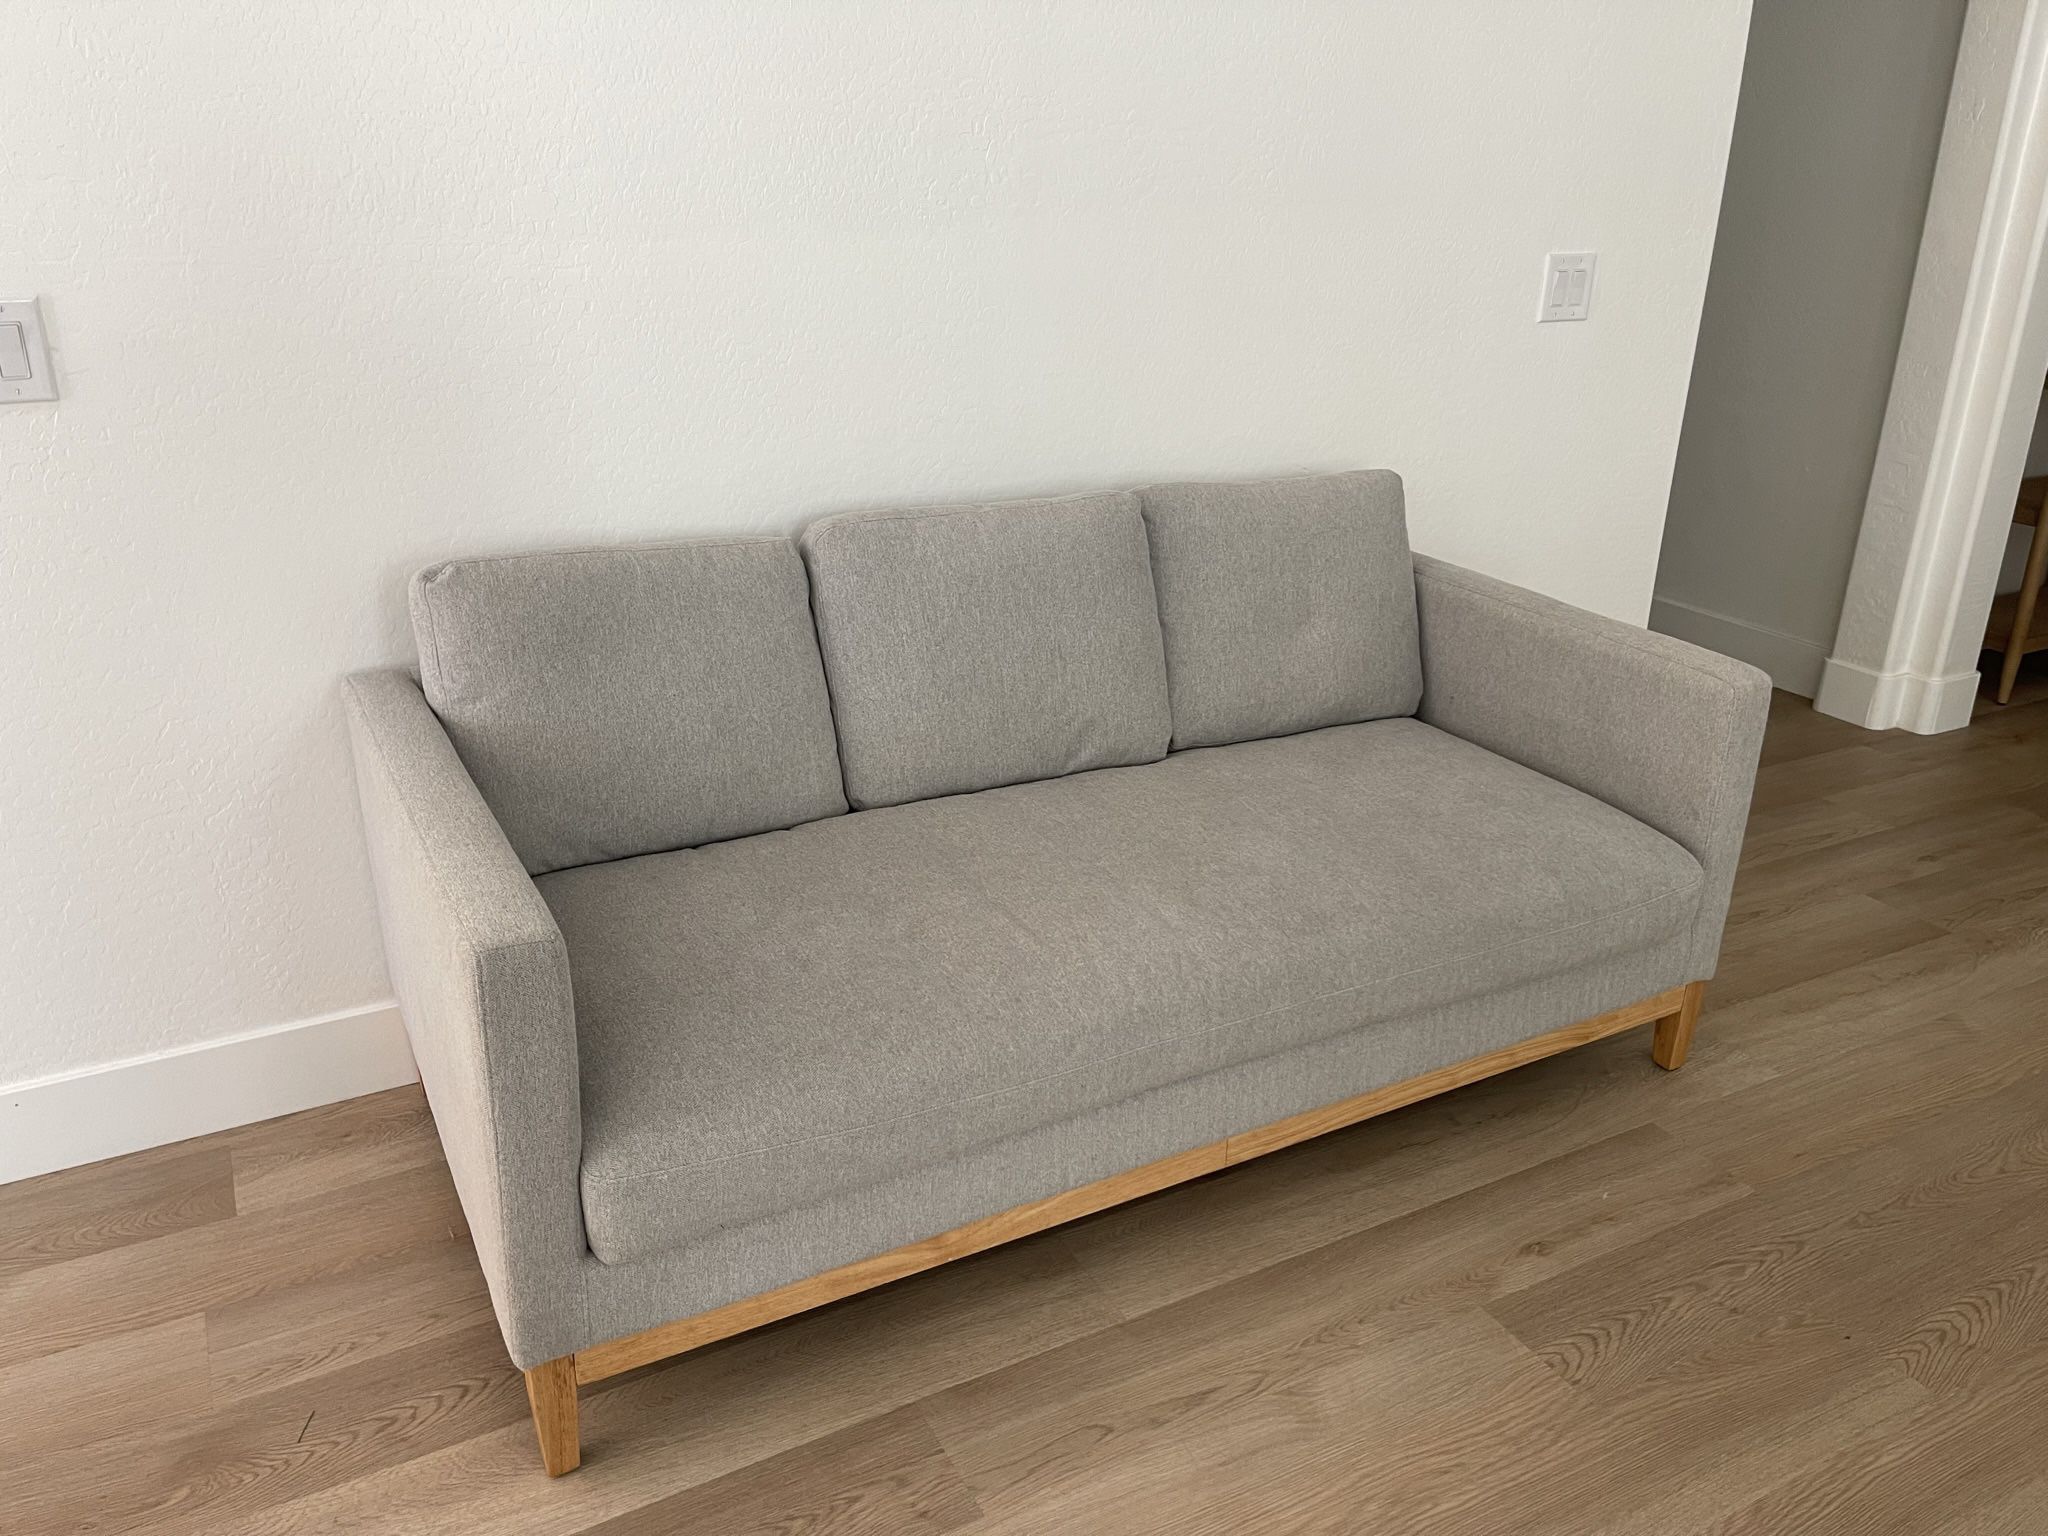 Grey Couch- Great Condition!